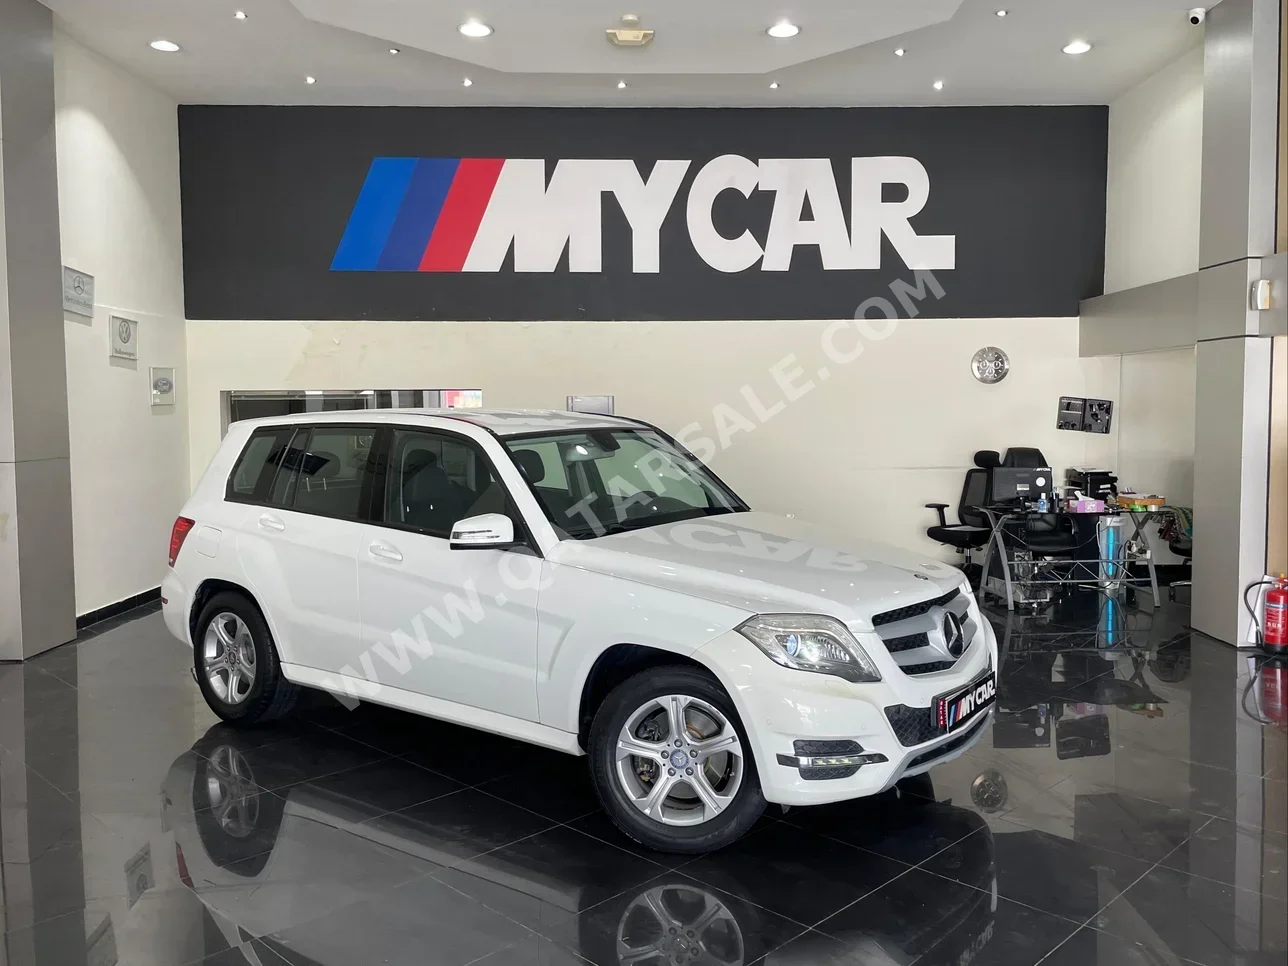 Mercedes-Benz  GLK  250  2015  Automatic  59,000 Km  4 Cylinder  Four Wheel Drive (4WD)  SUV  White